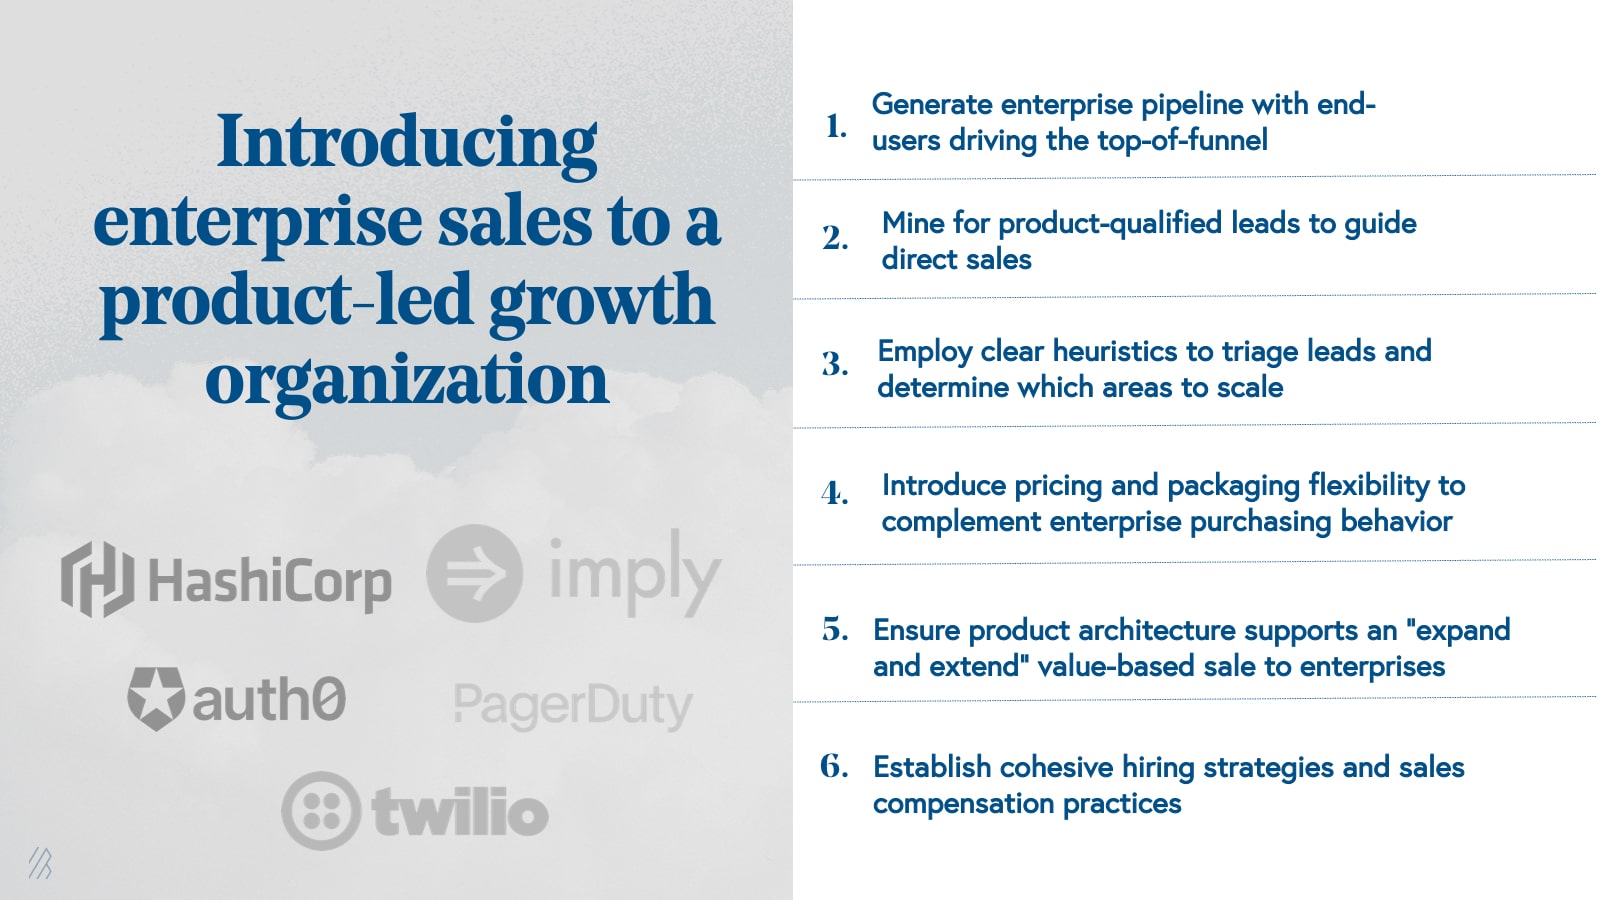 Introducing enterprise sales to a product-led growth organization